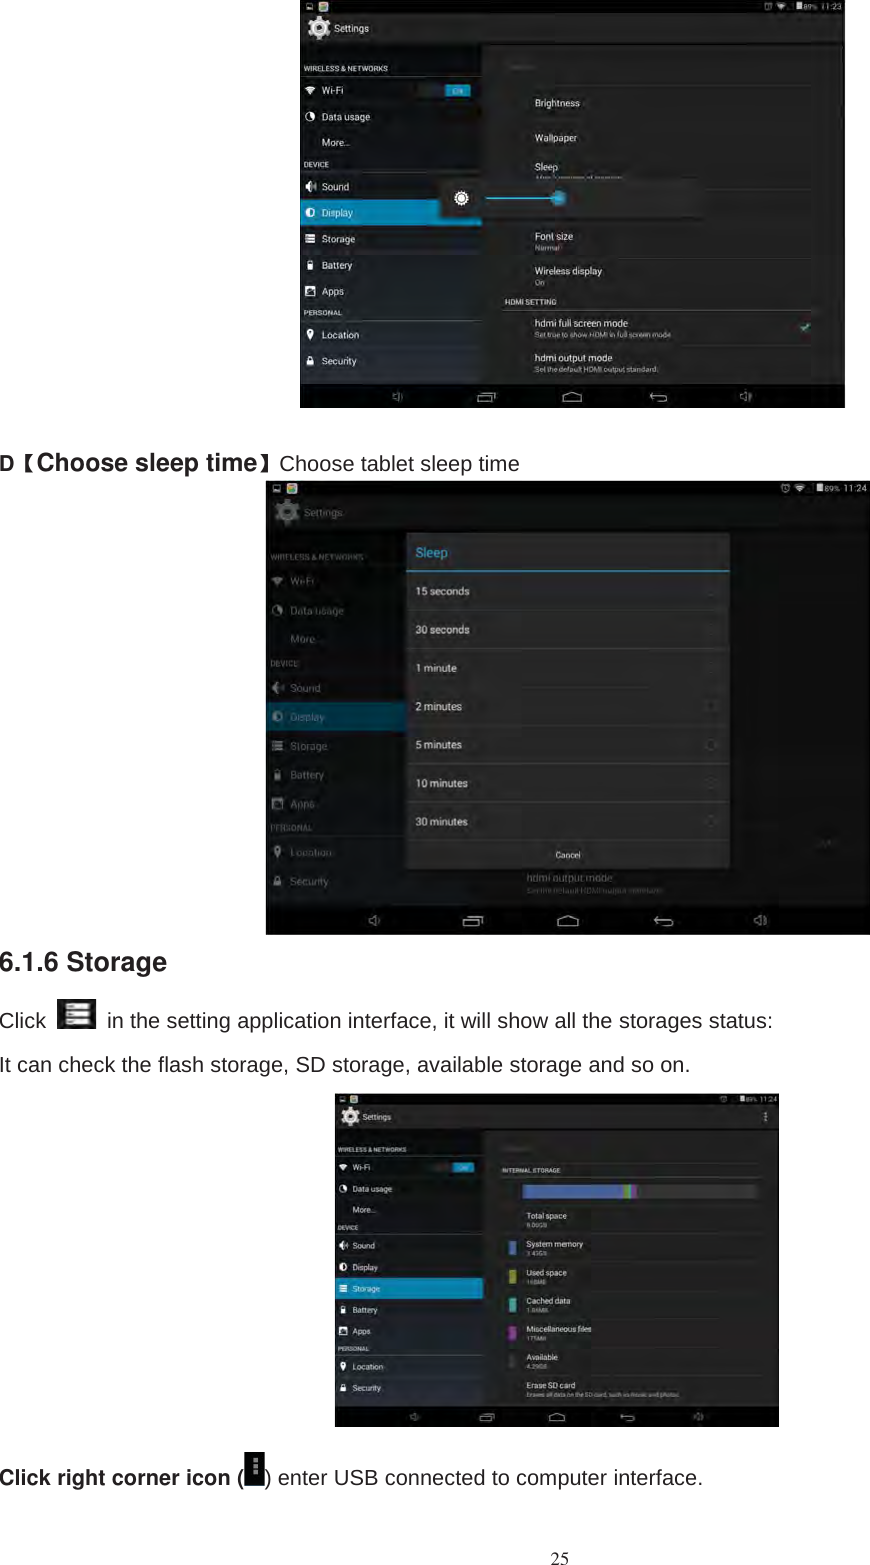 25D【Choose sleep time】Choose tablet sleep time6.1.6 StorageClick in the setting application interface, it will show all the storages status:It can check the flash storage, SD storage, available storage and so on.Click right corner icon ( ) enter USB connected to computer interface.